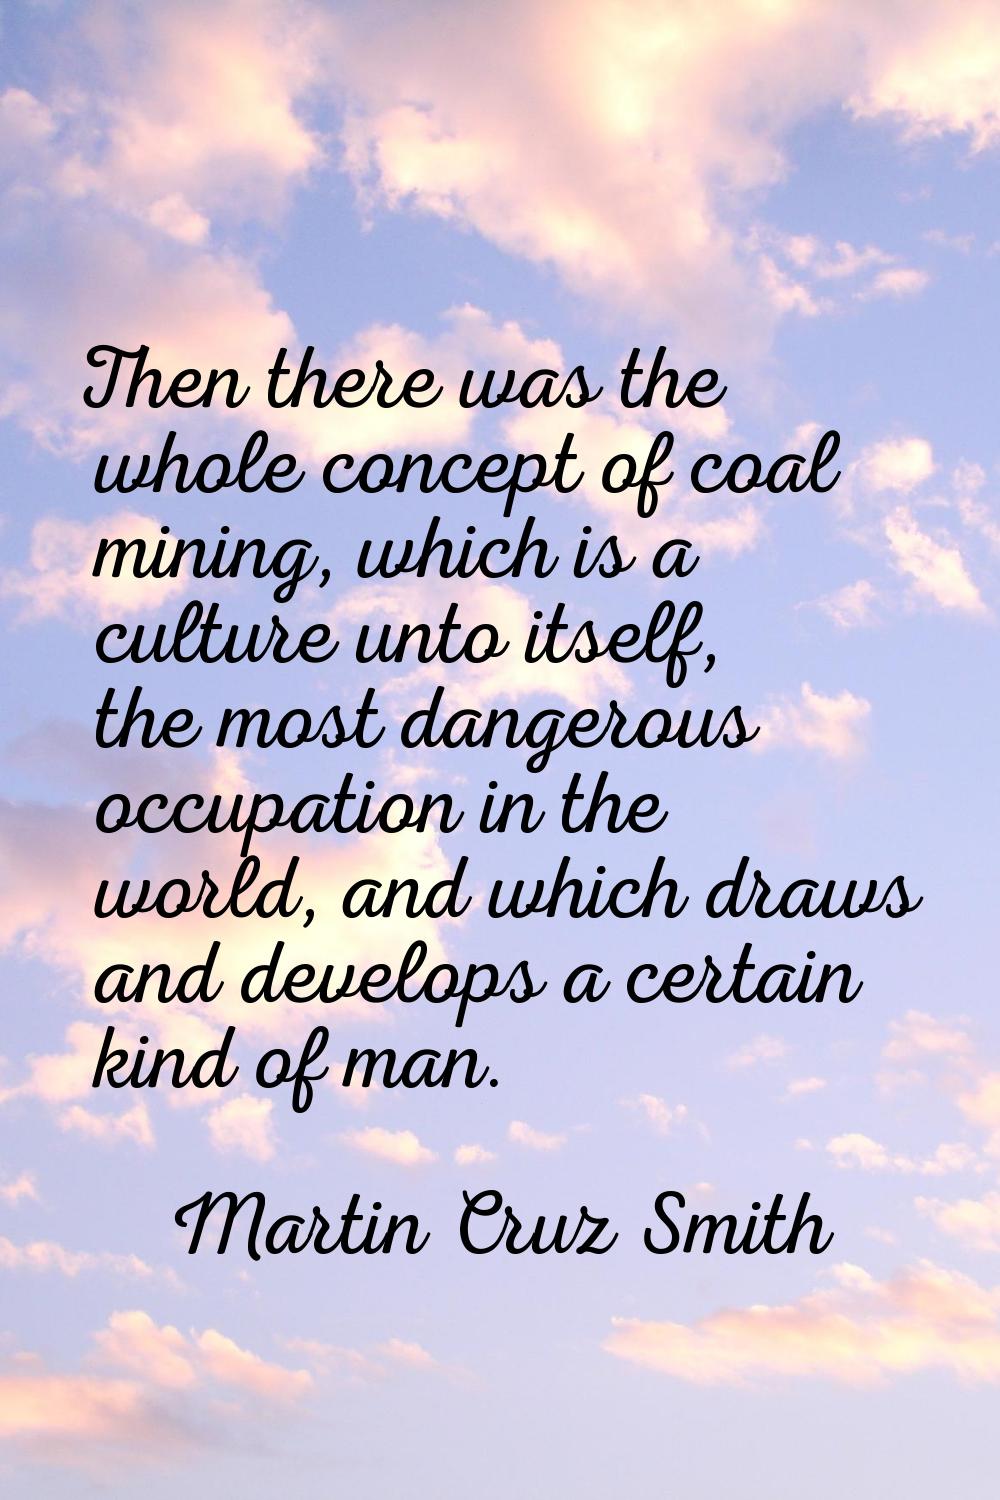 Then there was the whole concept of coal mining, which is a culture unto itself, the most dangerous